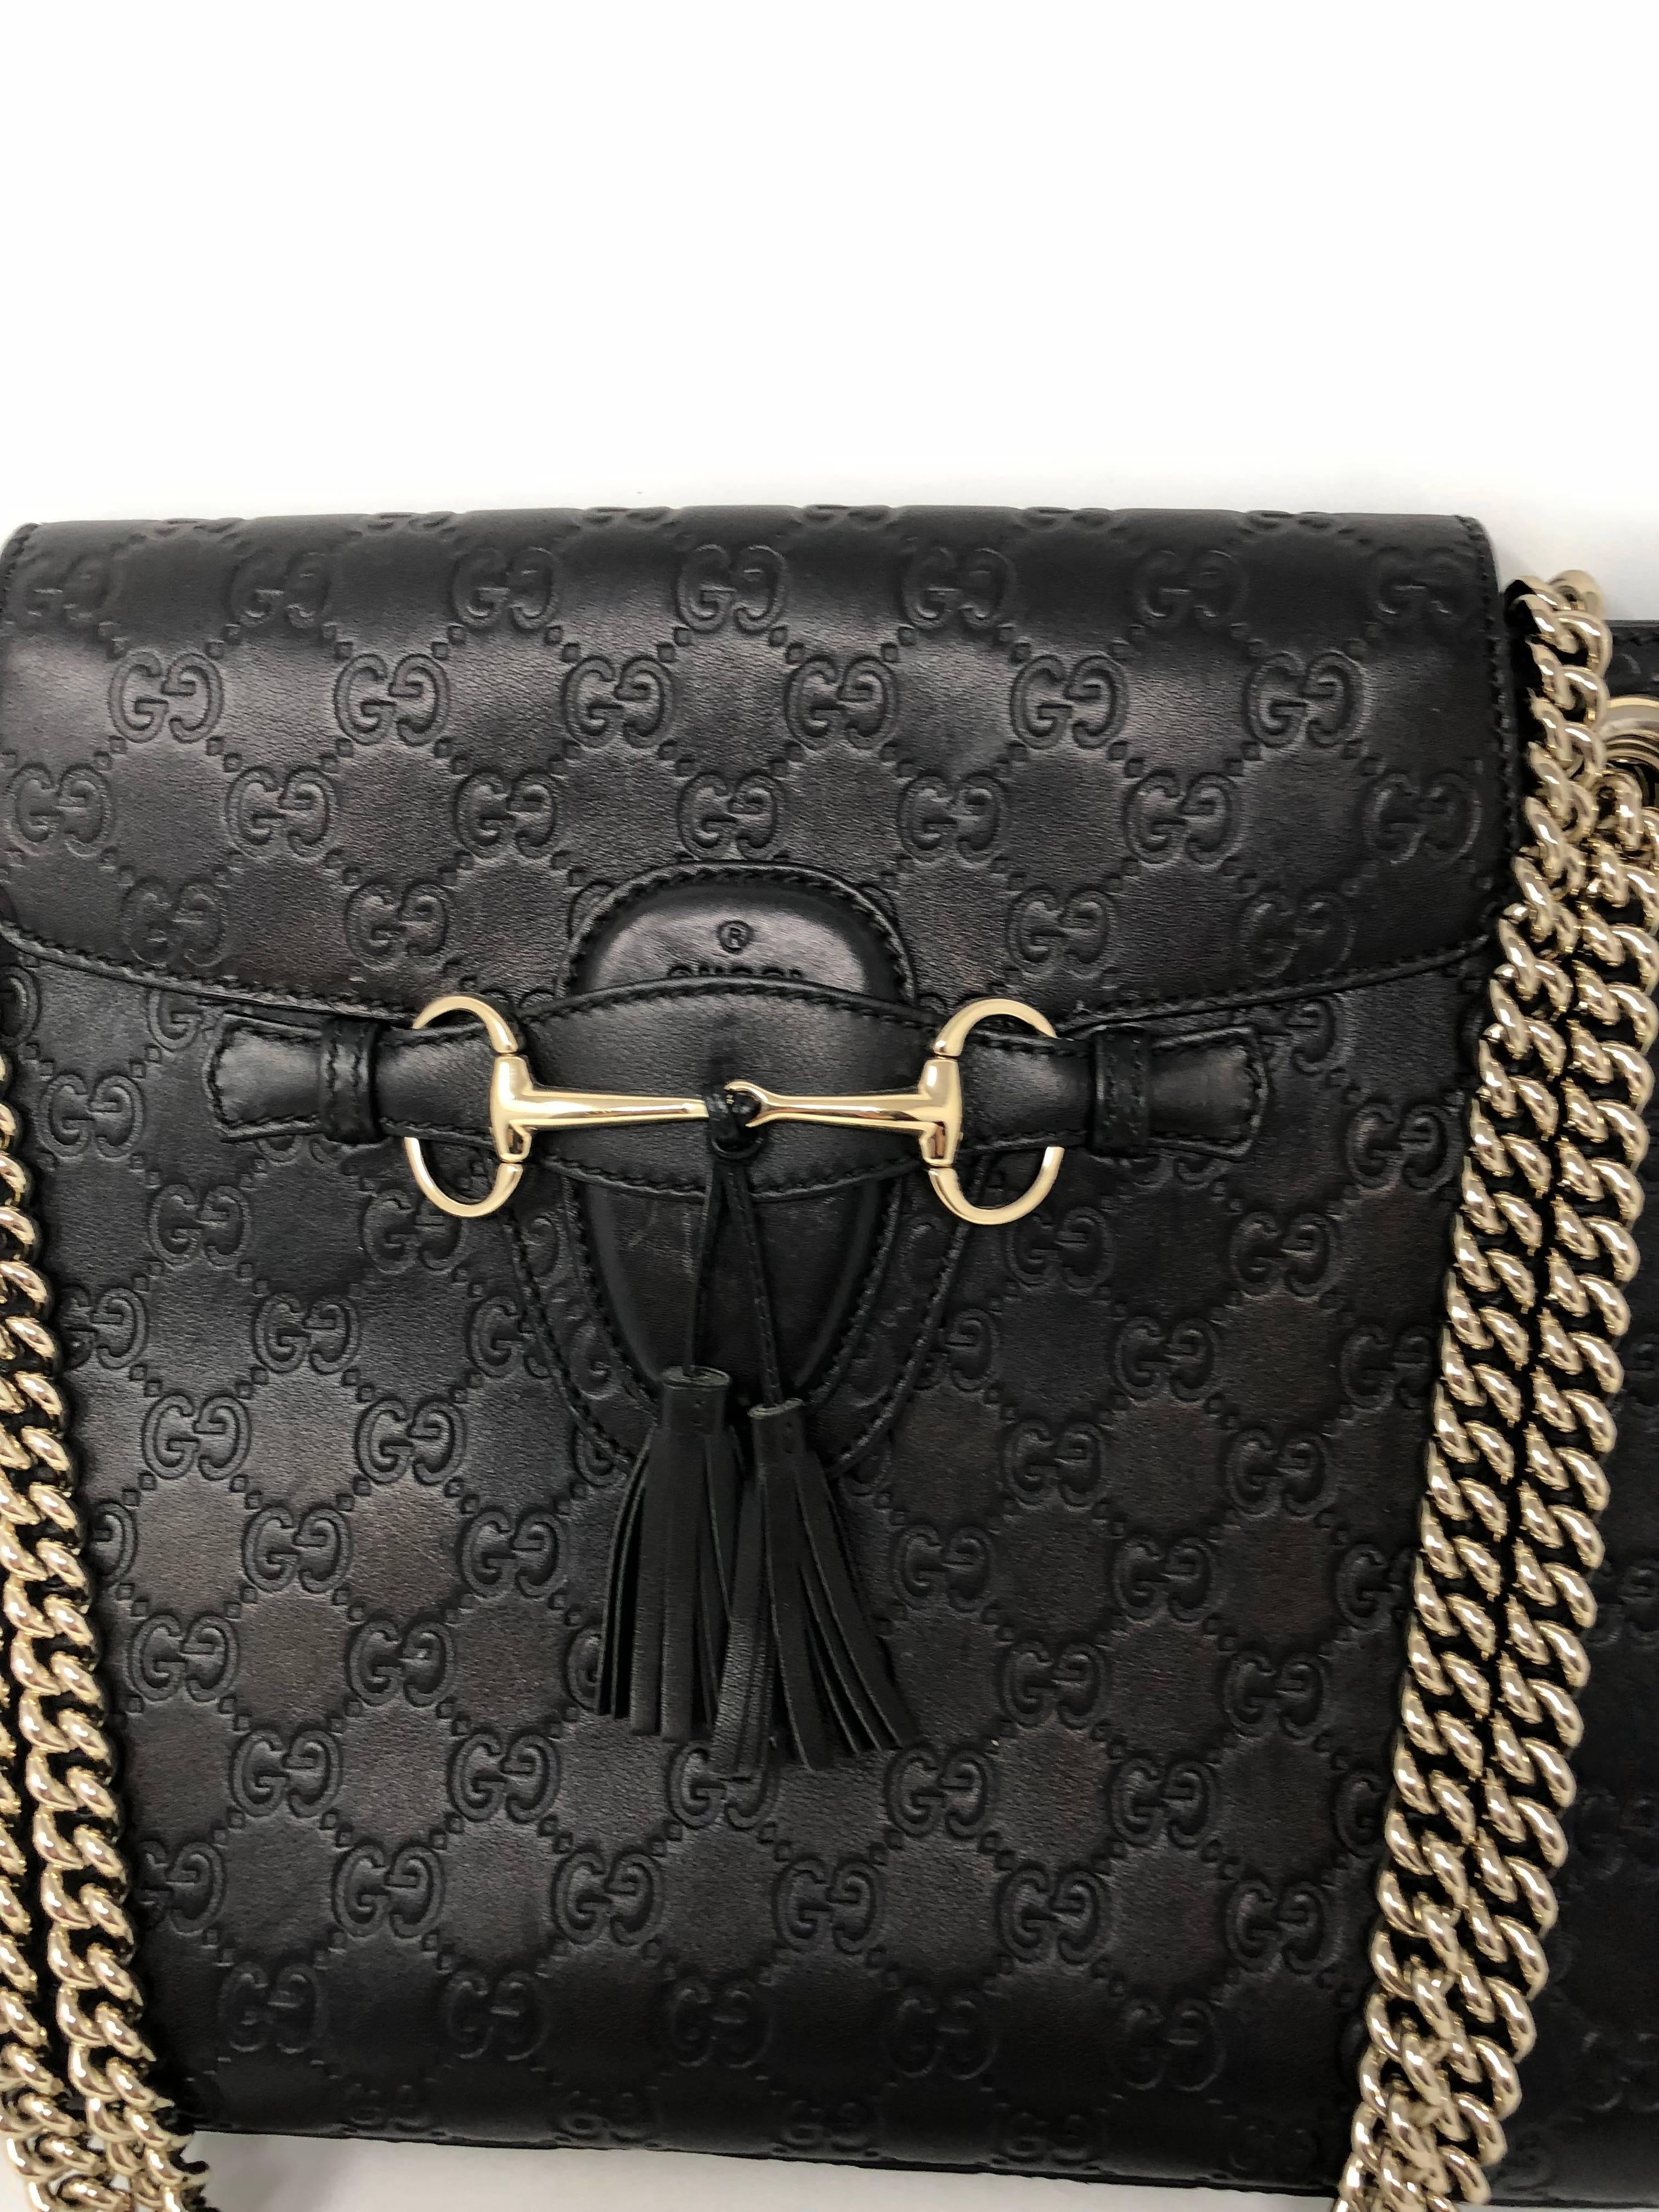 GUCCI Guccissima Large Emily Chain Shoulder Bag in black embossed leather, 
drop: 11.5 in. when doubled up, but can be worn as a crossbody 